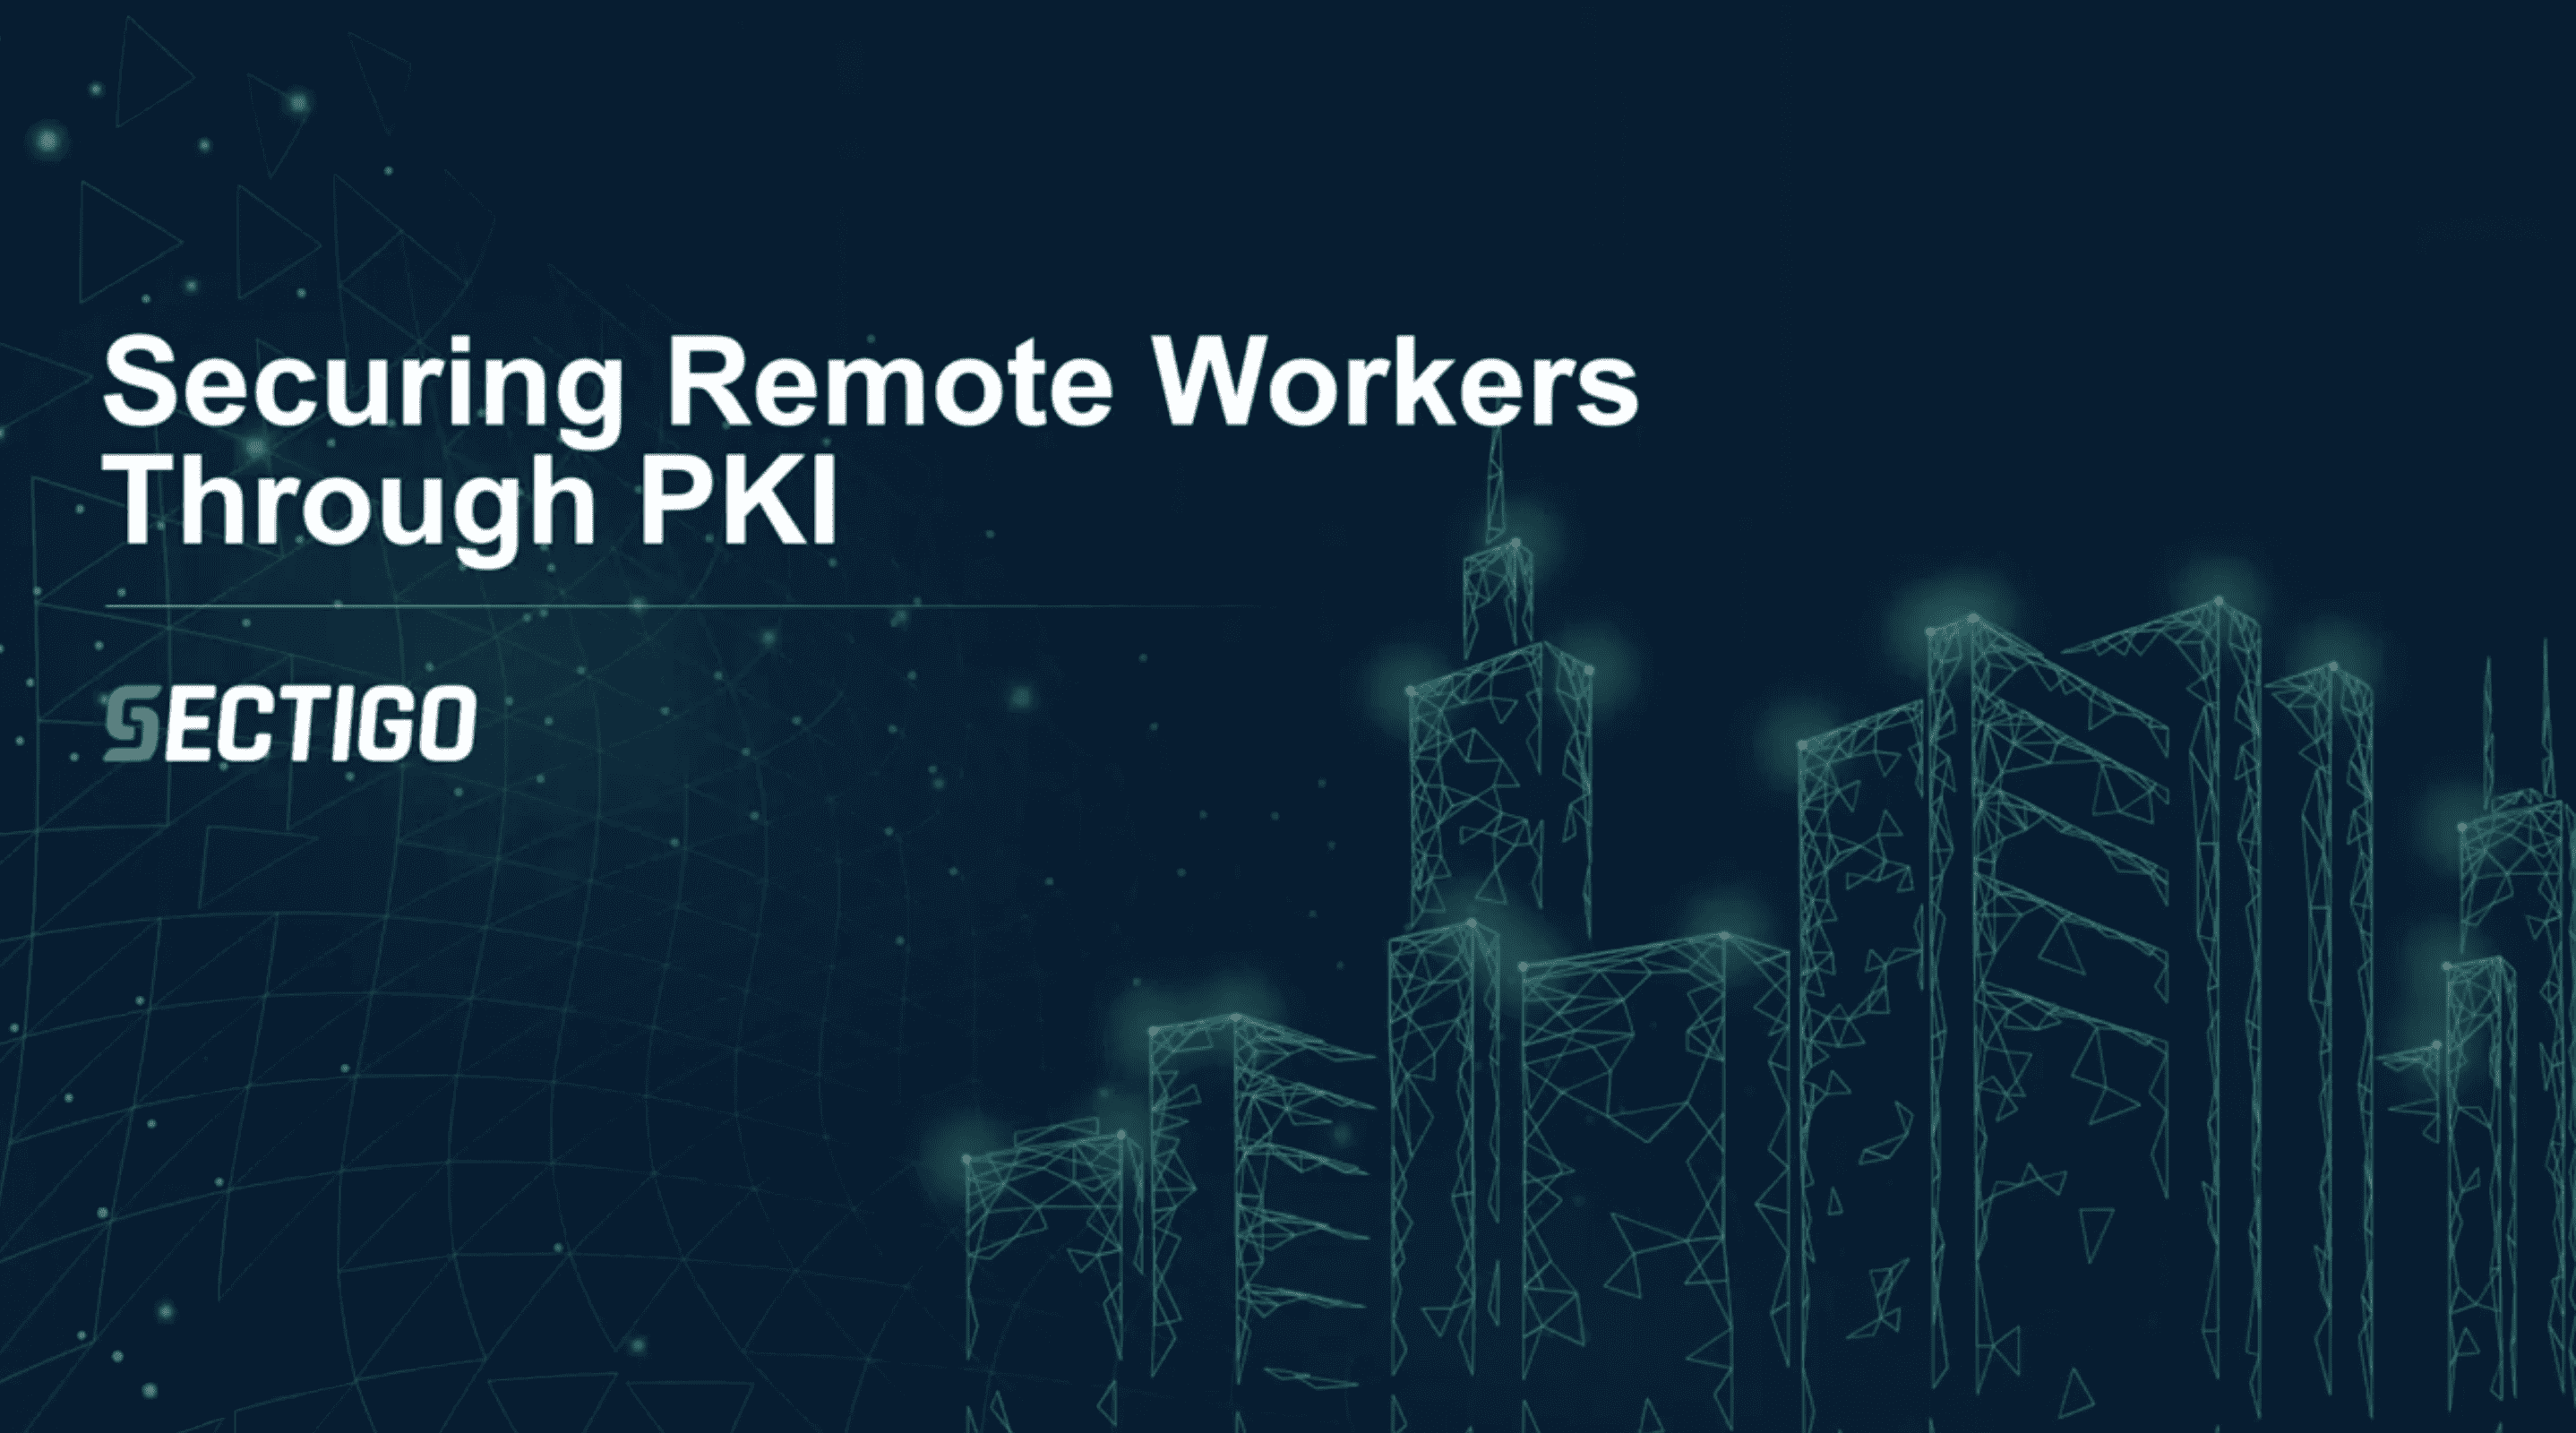 Securing remote workers through PKI